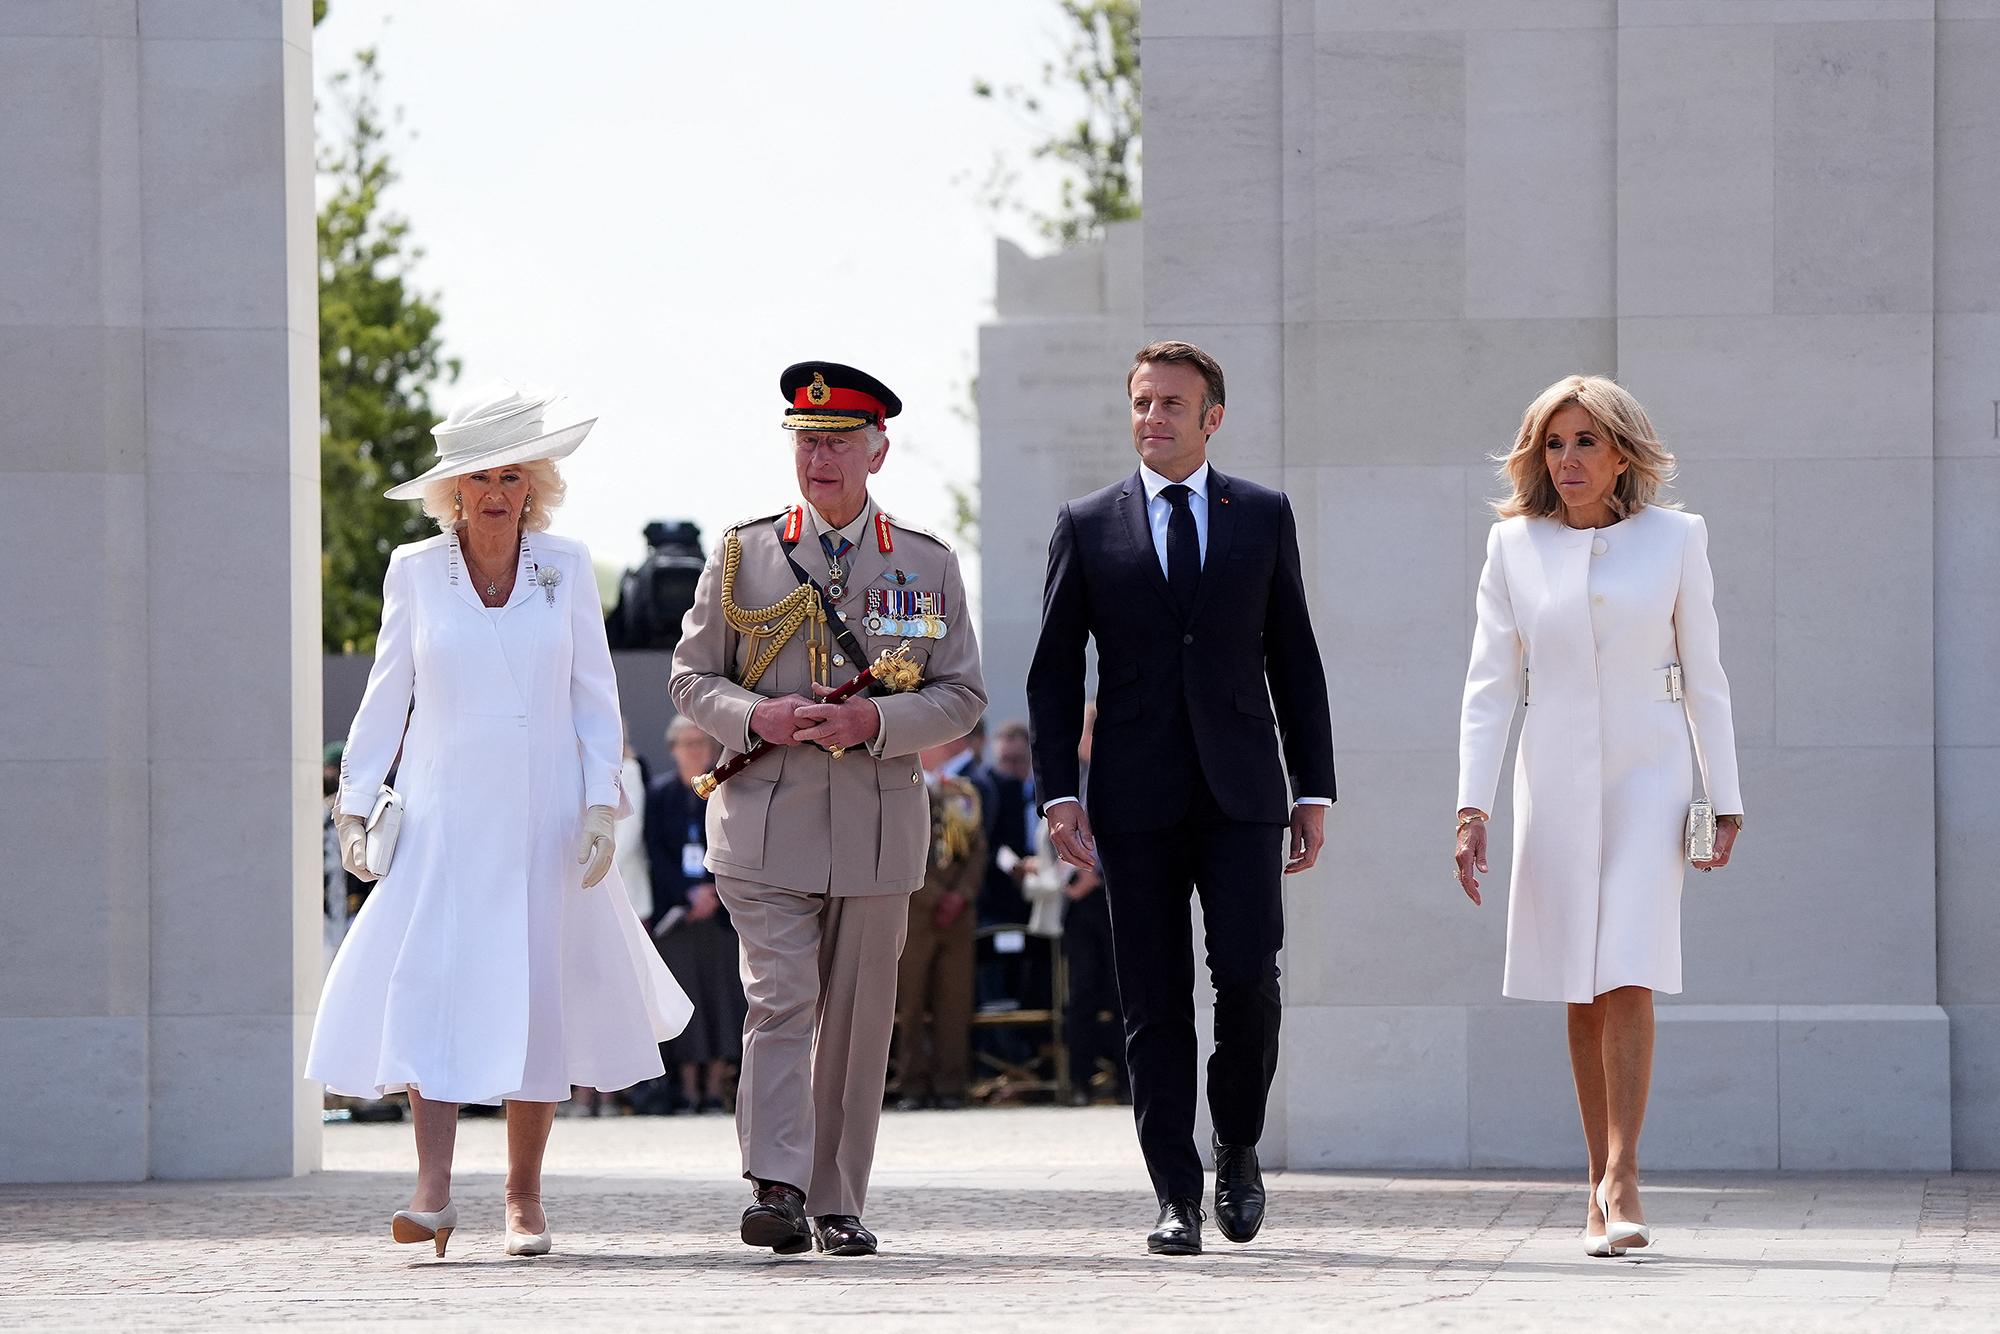 Britain's King Charles III and his wife Britain's Queen Camilla walk with France's President Emmanuel Macron and his wife Brigitte Macron as they pass the memorial wall during the ceremony marking the 80th anniversary of the World War II D-Day Allied landings near the village of Ver-sur-Mer, France, on June 6.